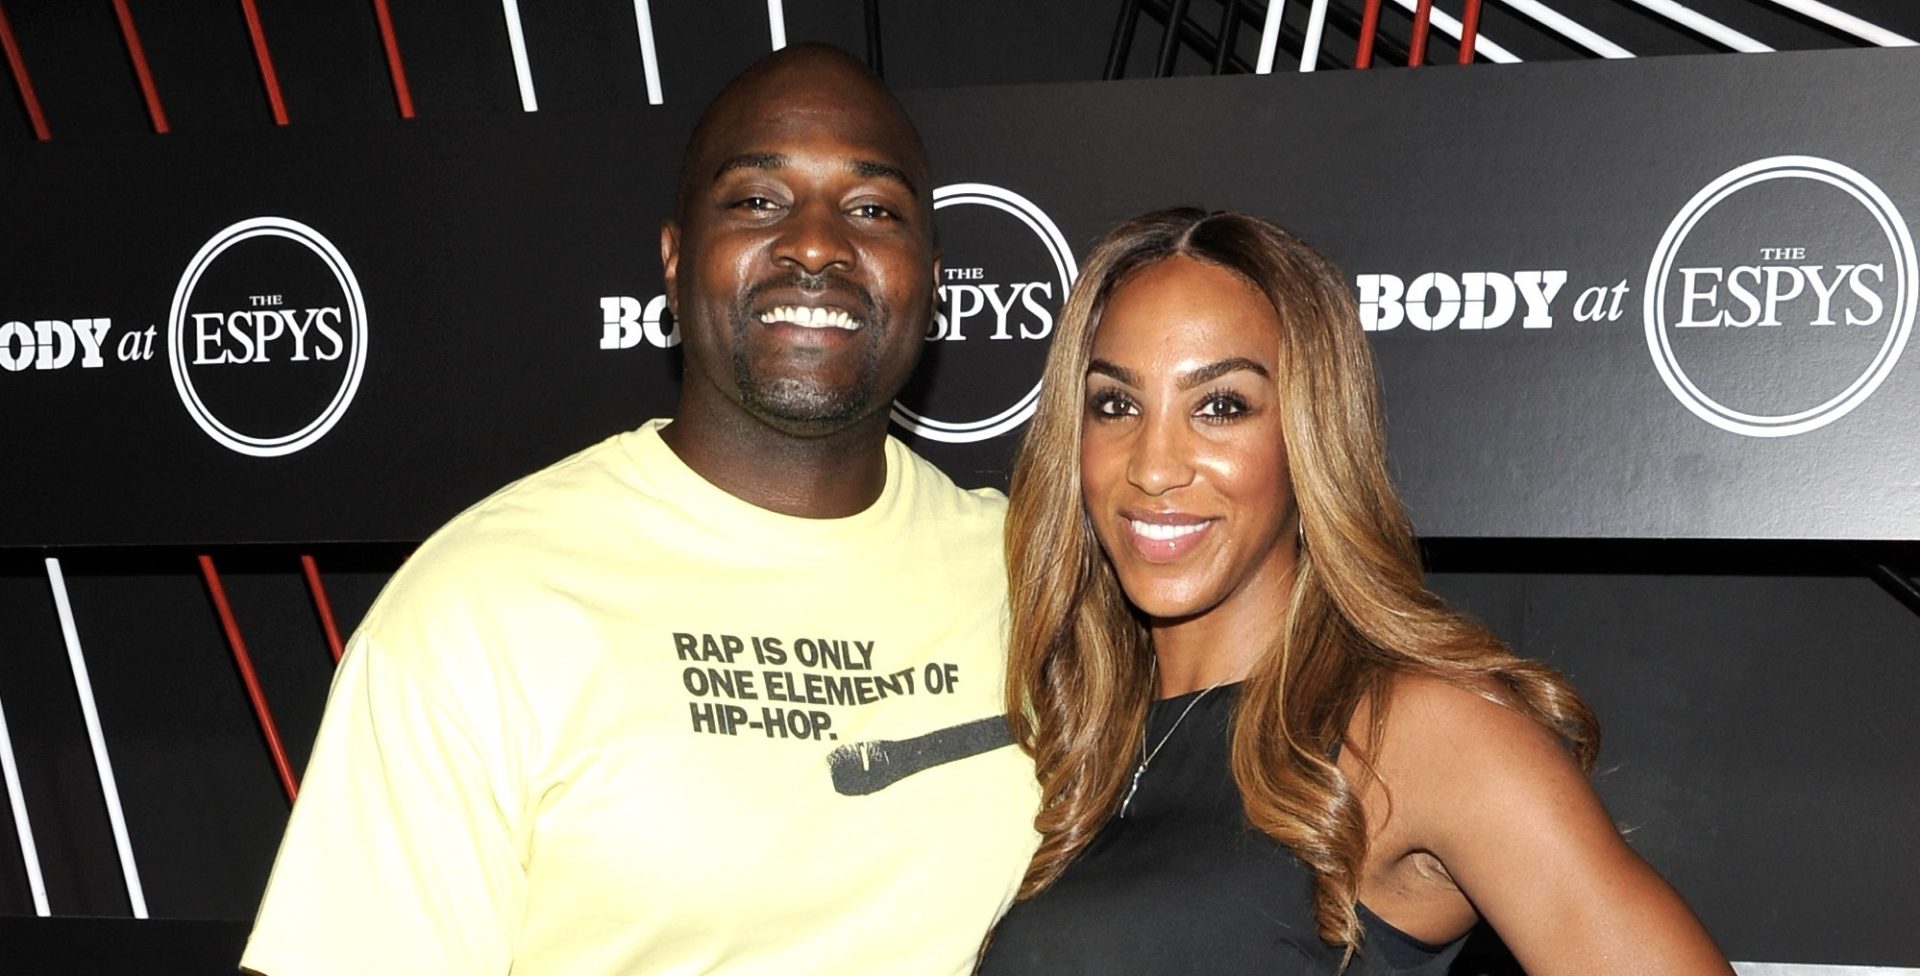 Annemarie Wiley, Wife Of NFL Star Marcellus Wiley, Reportedly Set To Make ‘RHOBH’ Debut